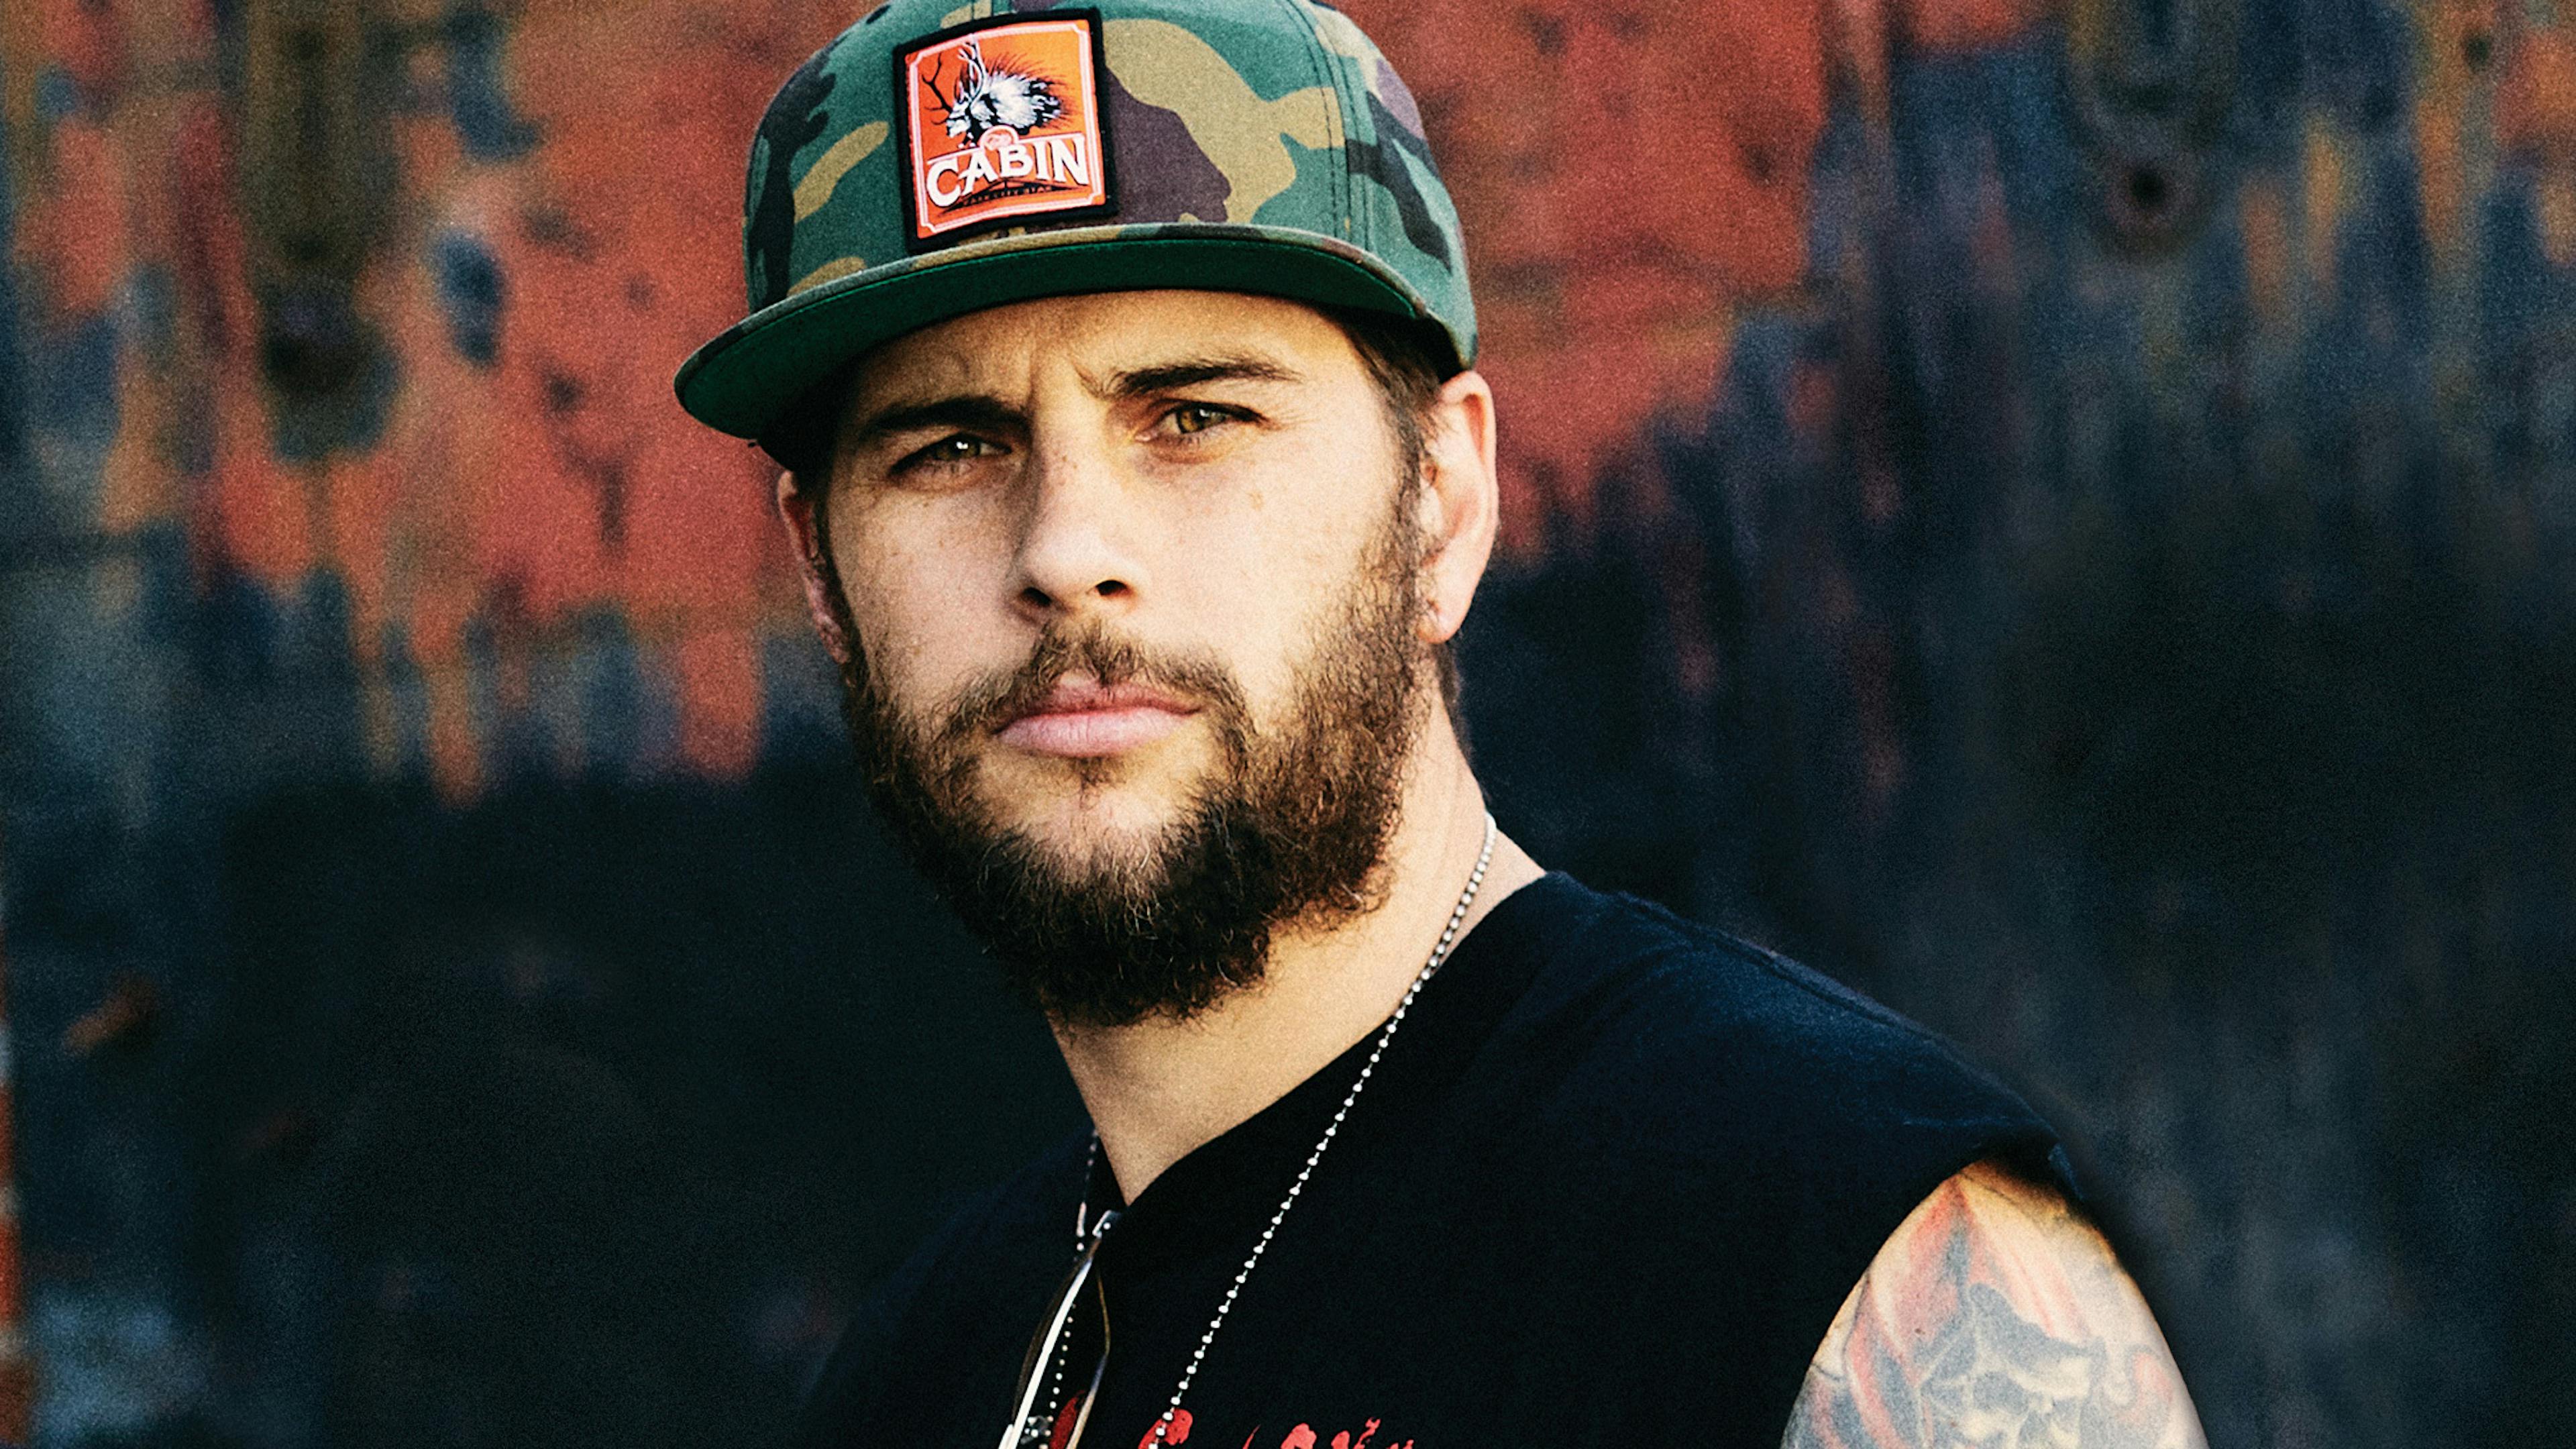 Avenged Sevenfold's M. Shadows: “You want to put your stake in the ground and be on the right side of history”